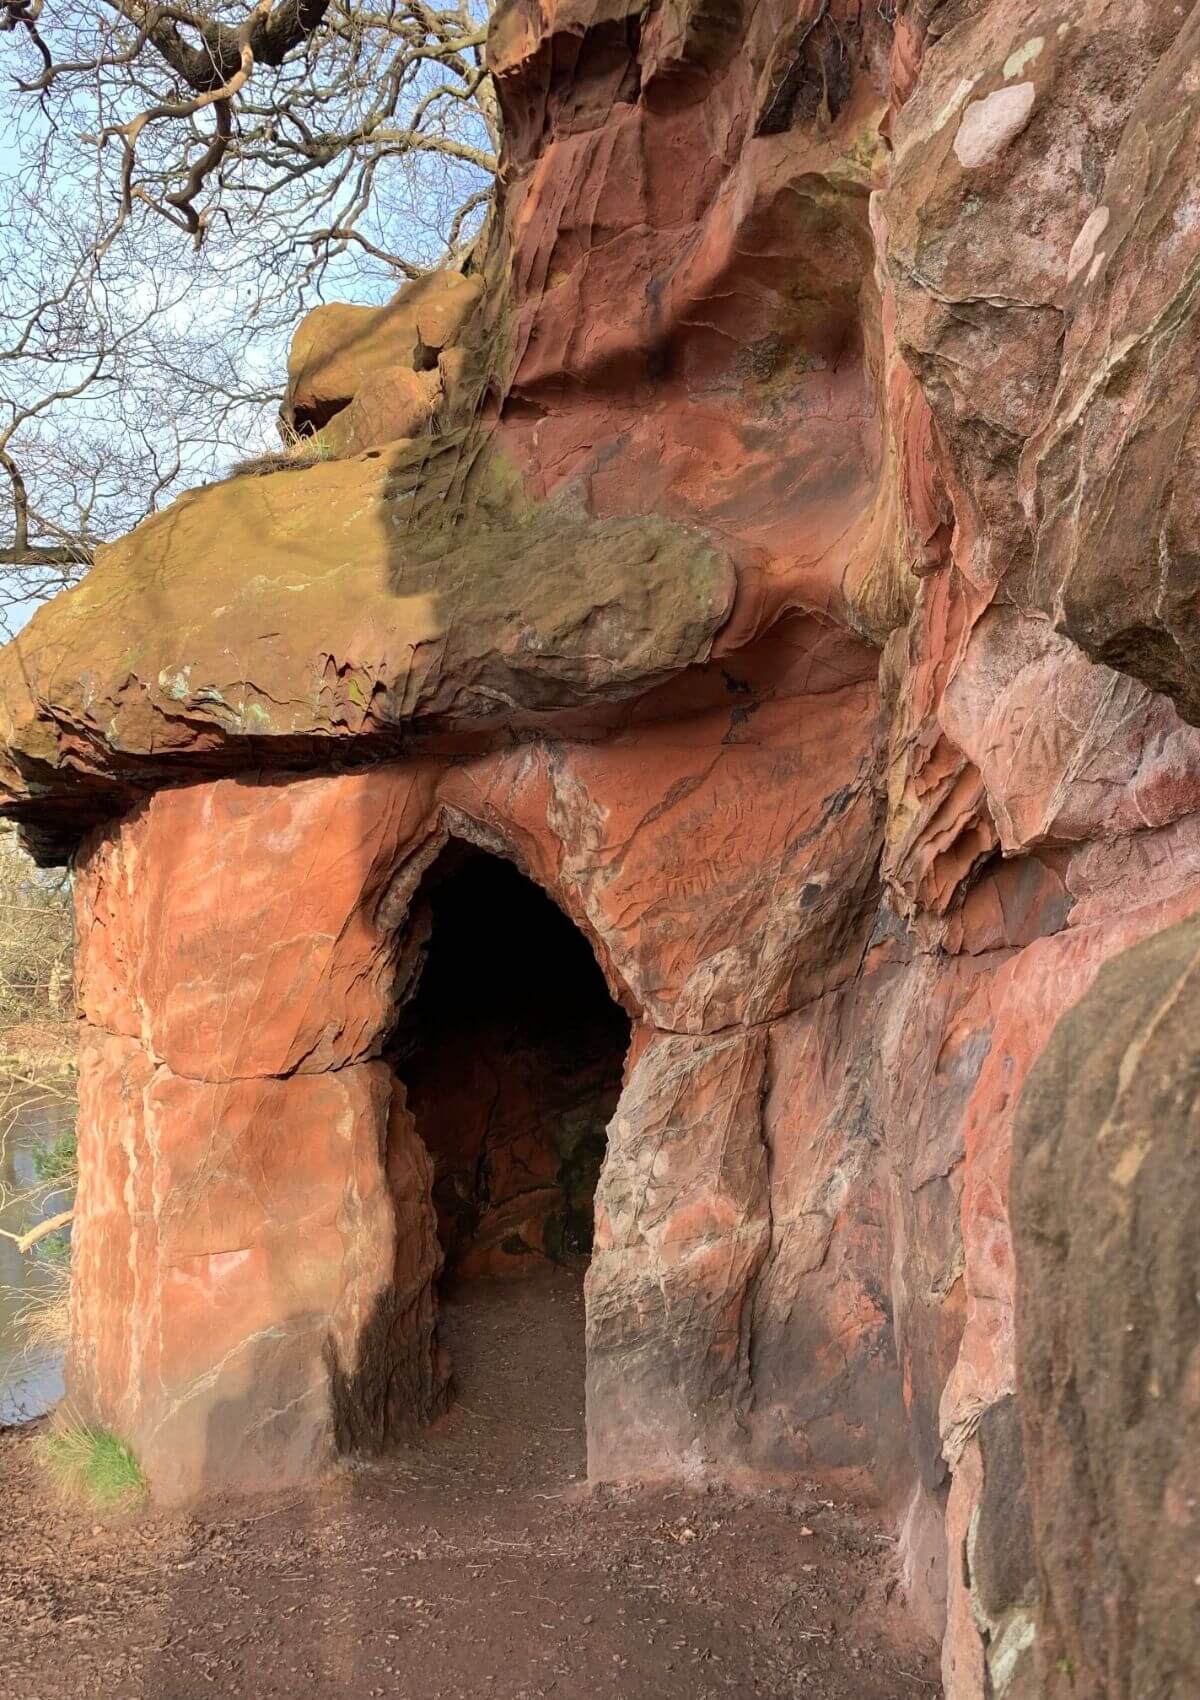 Lacy's Caves in the Lake District town of Penrith